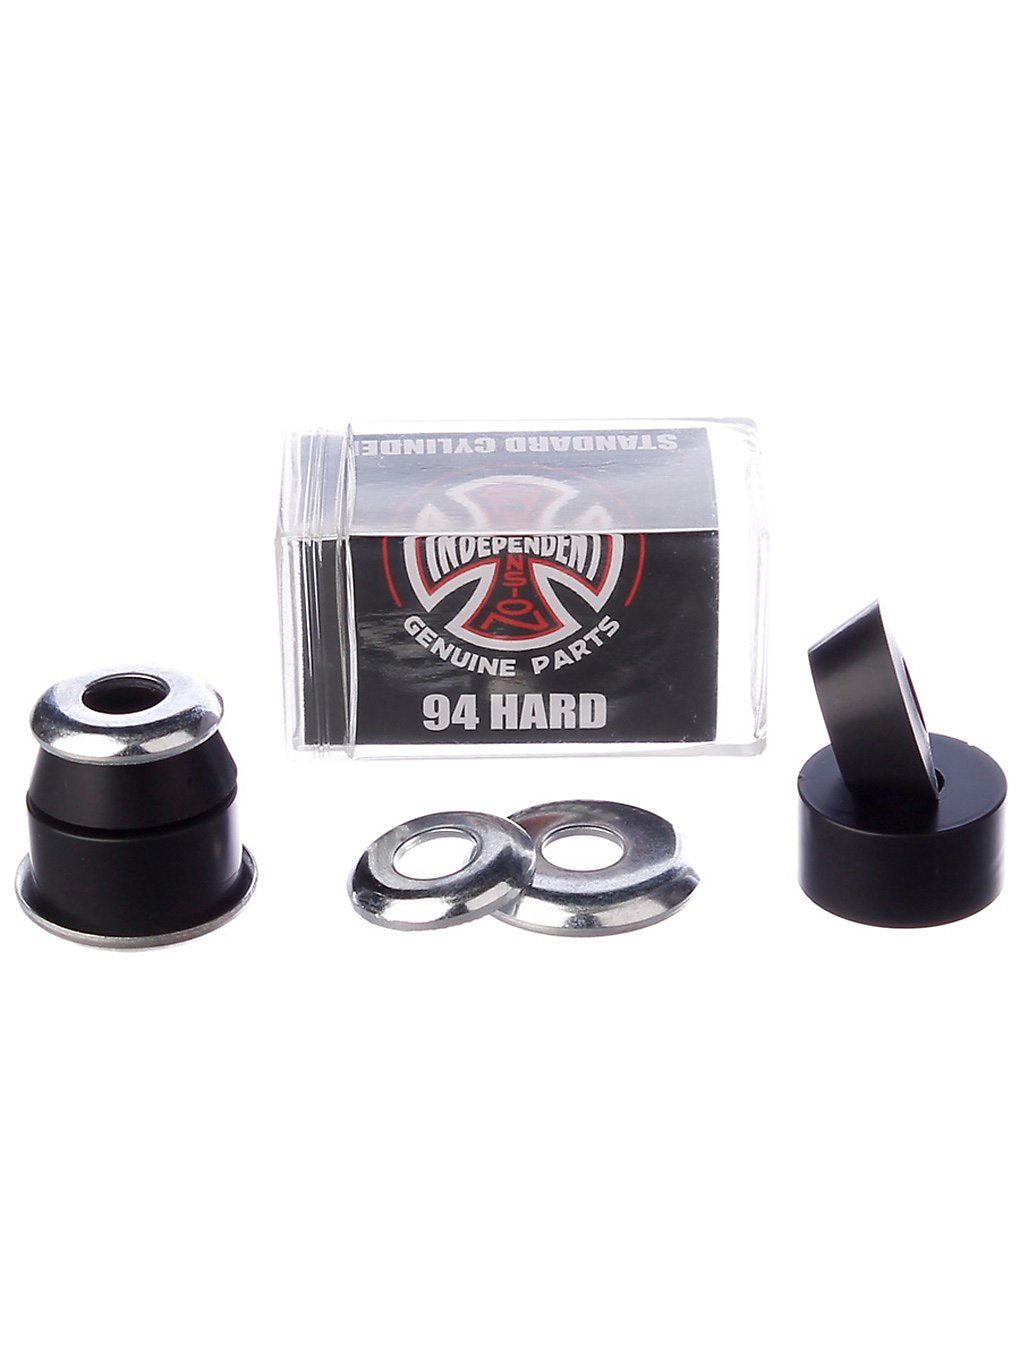 Independent Cylinder Cushions Hard 94A Bushings noir